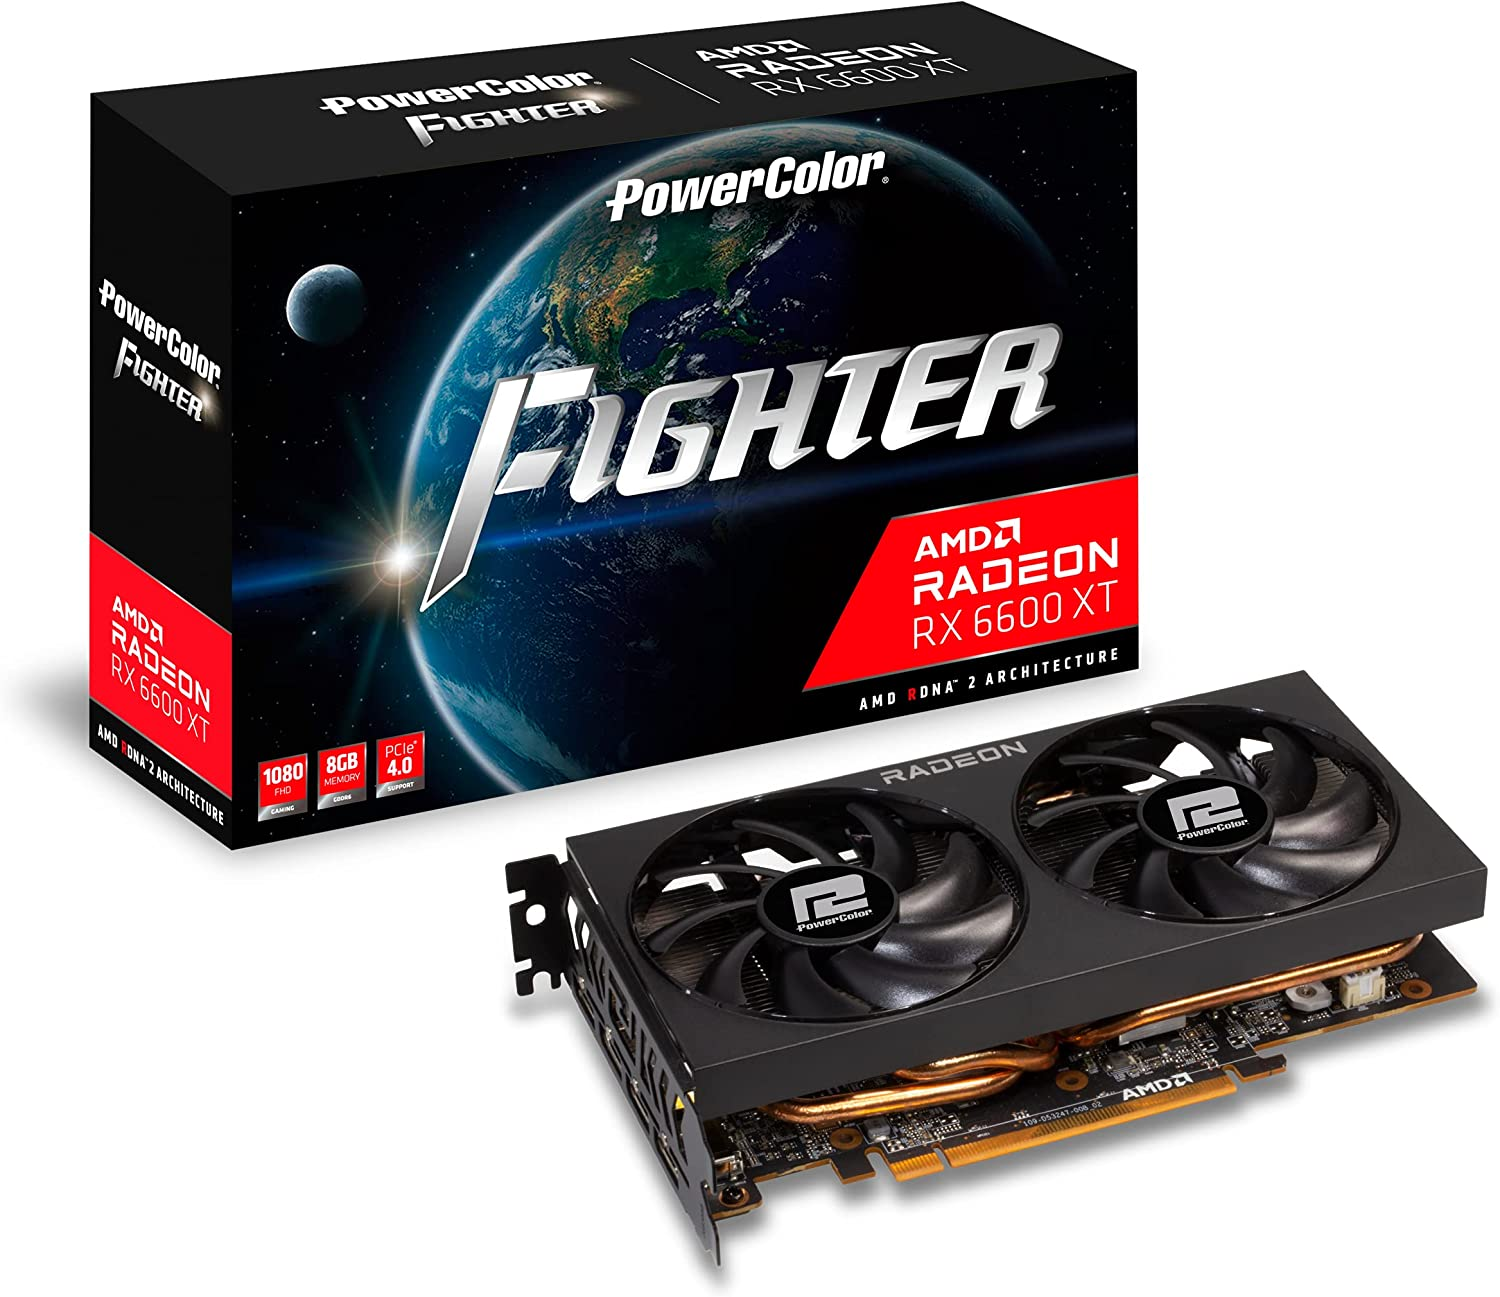 Amazon.com: PowerColor Fighter AMD Radeon RX 6600 XT Gaming Graphics Card with 8GB GDDR6 Memory, Powered by AMD RDNA 2, HDMI 2.1 : Electronics $299.99